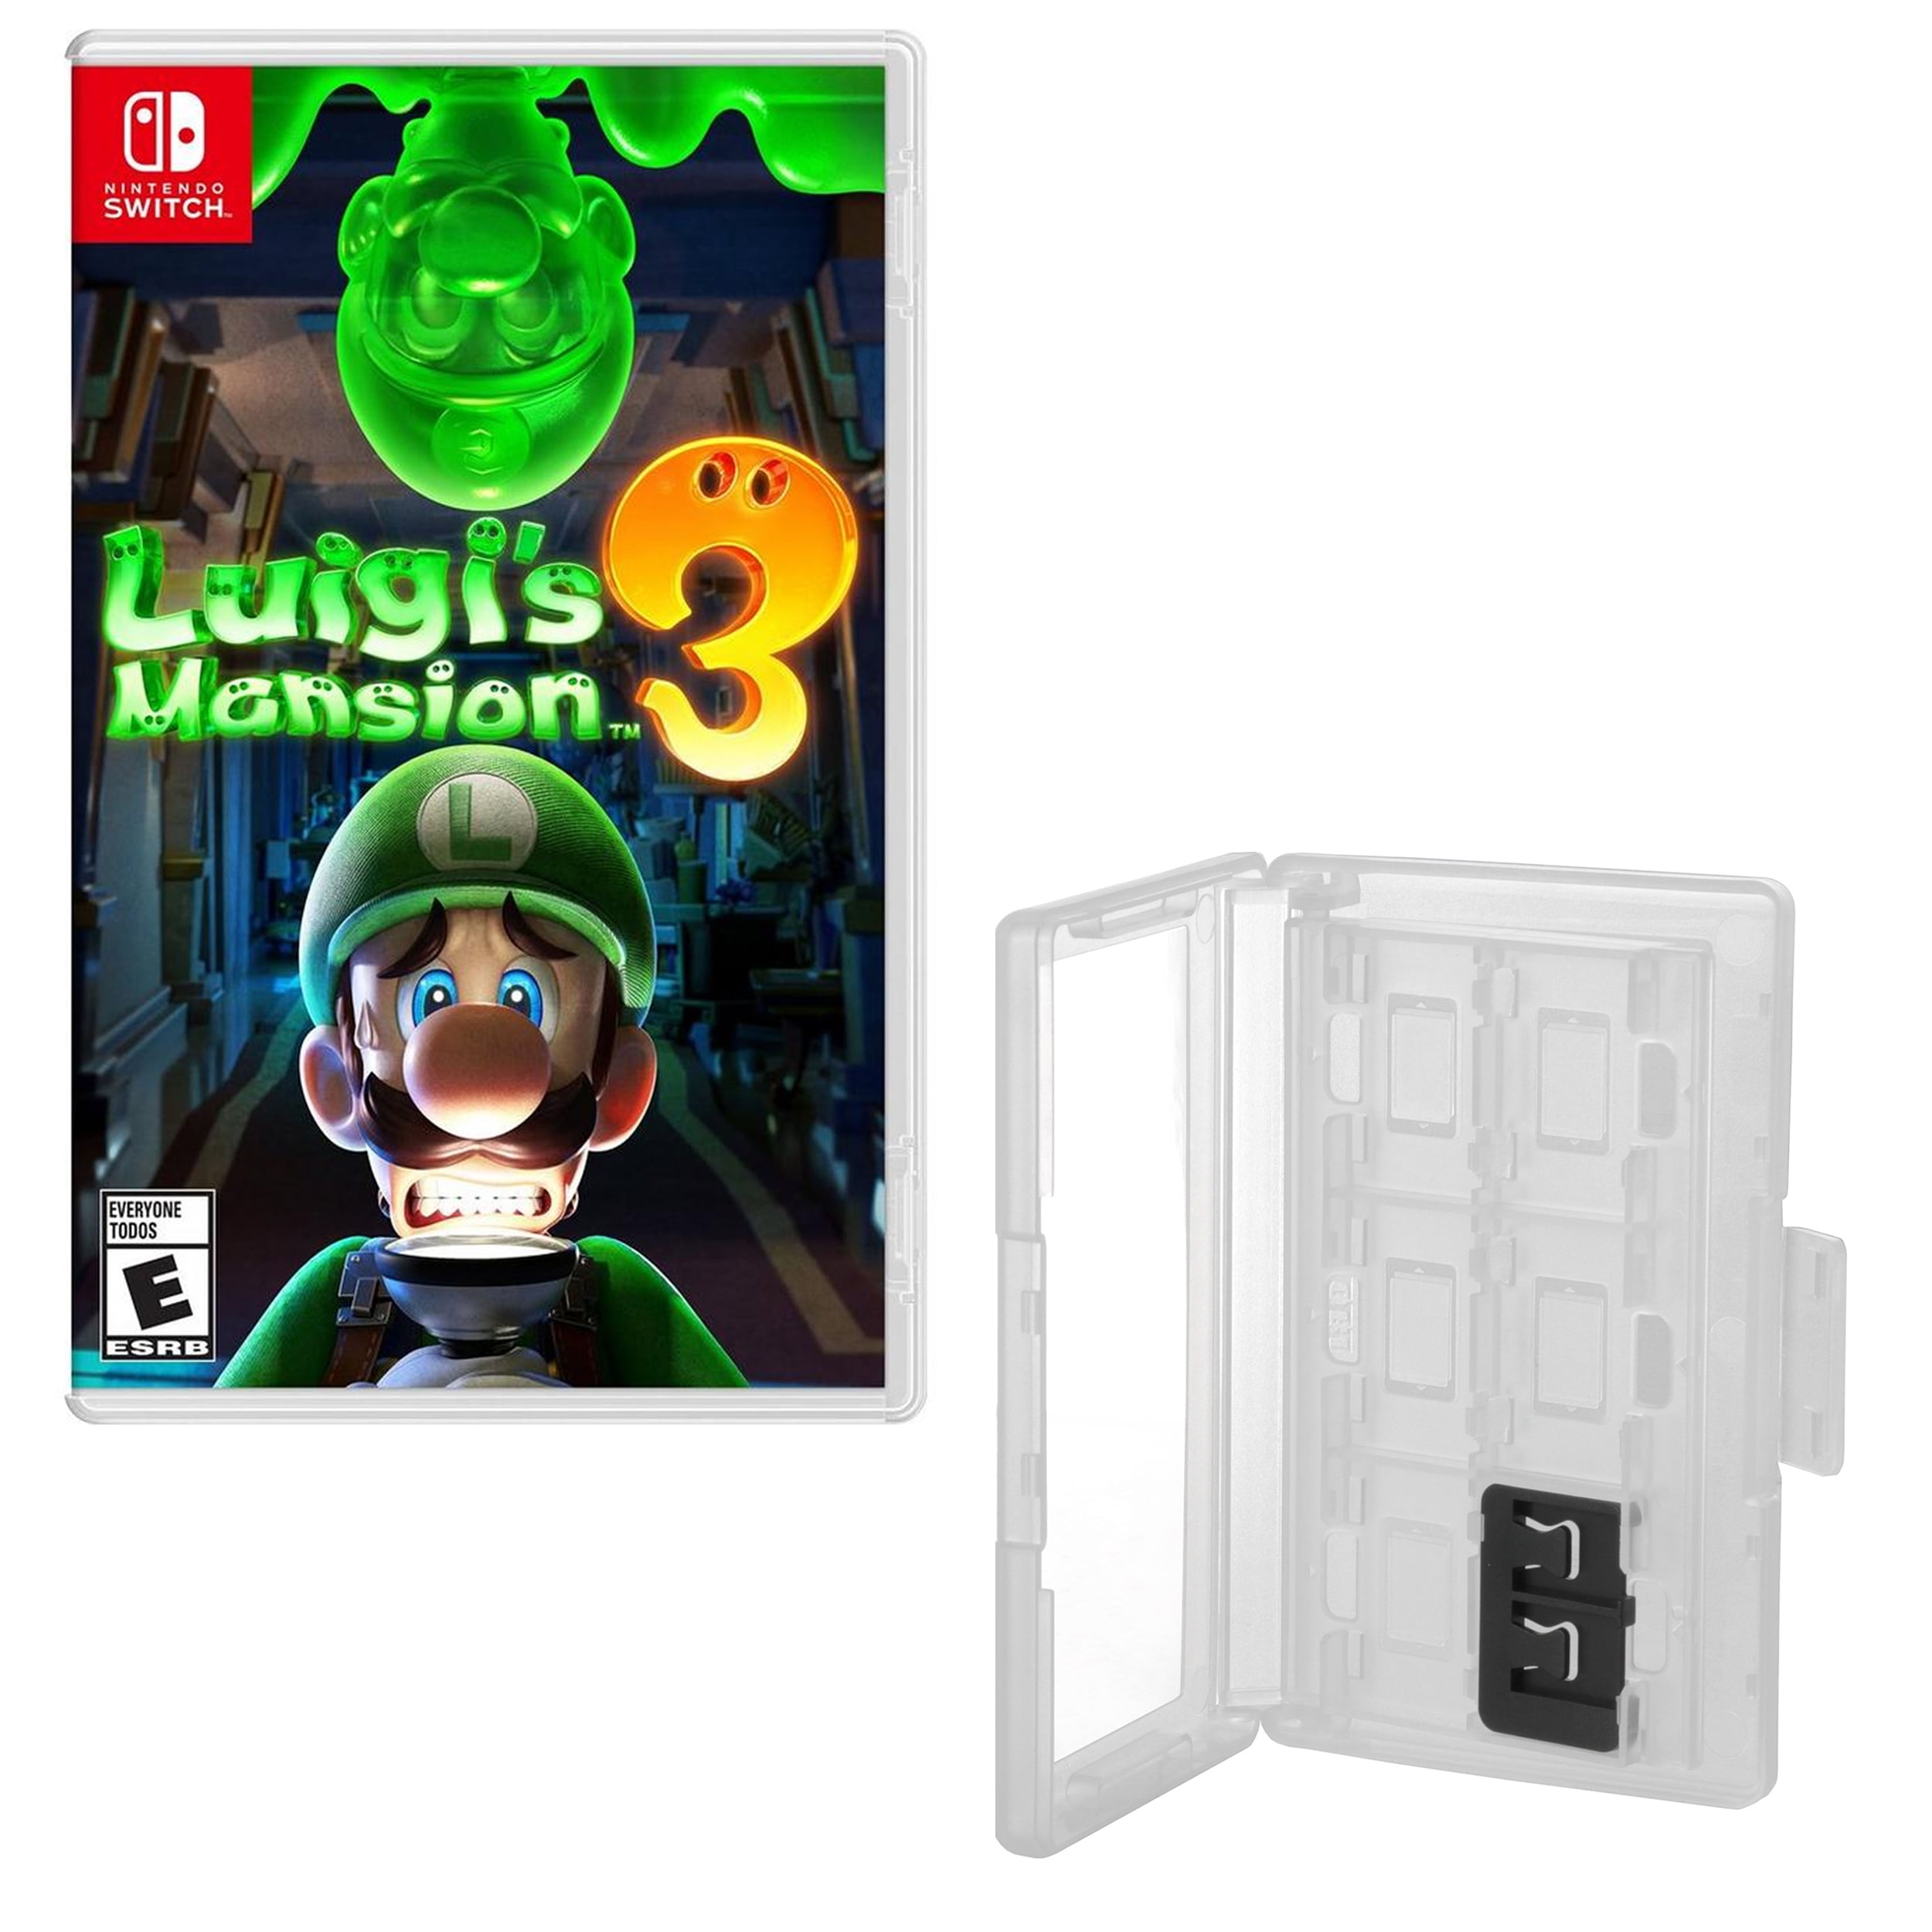 Luigi's Mansion 3 with Game Caddy for 12 Games for Nintendo Switch